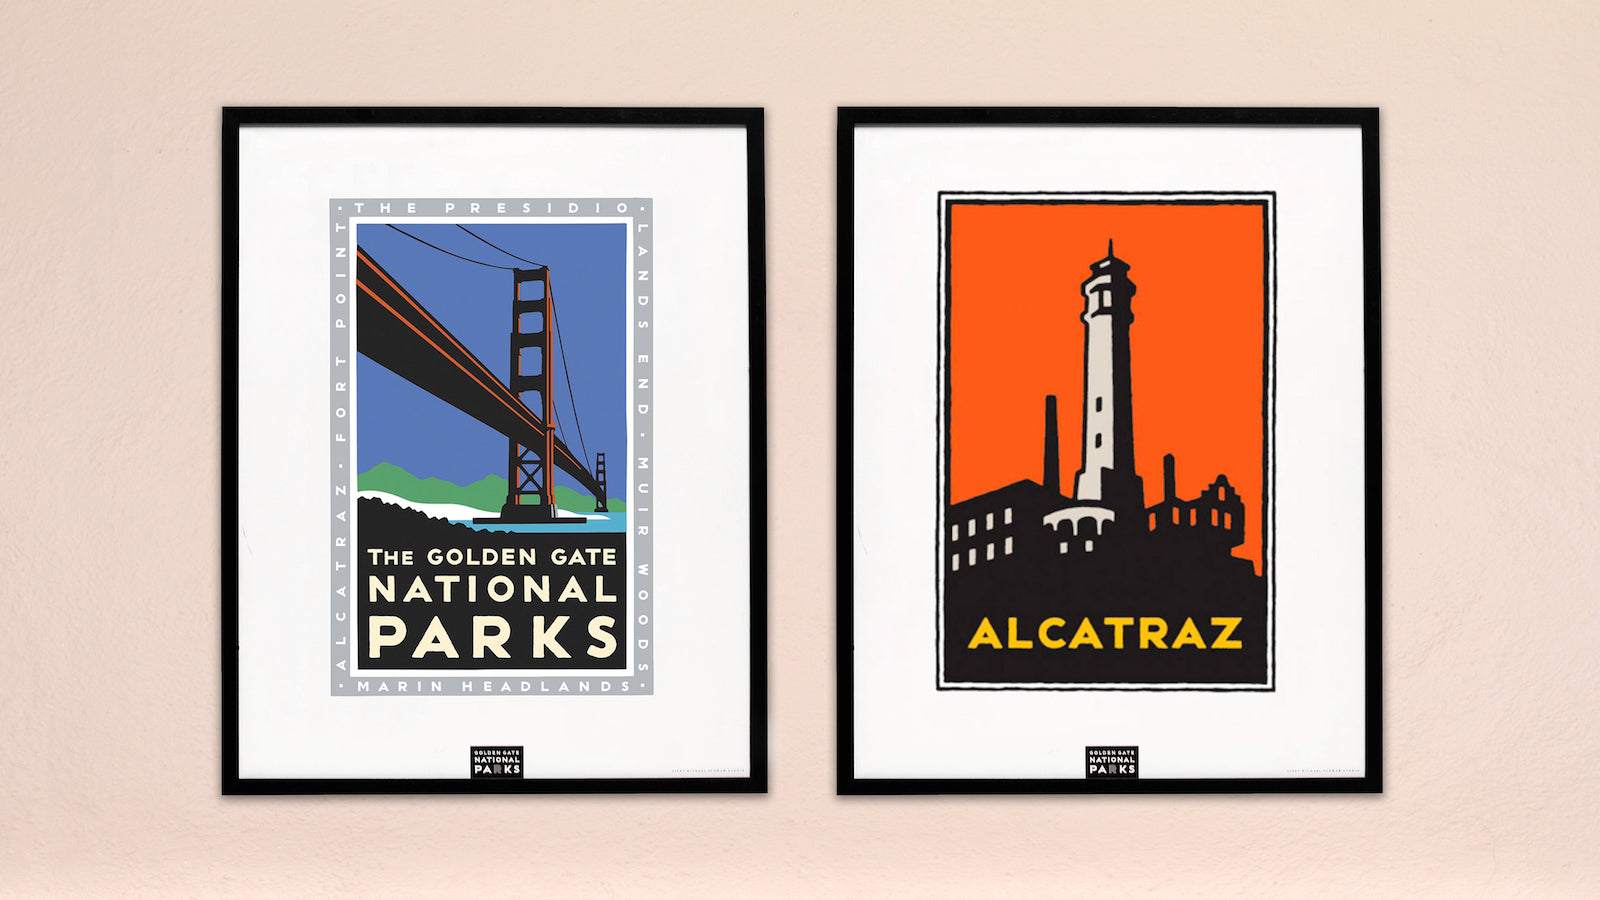 Two framed posters hang on a peach wall, Golden Gate National Parks and Alcatraz.